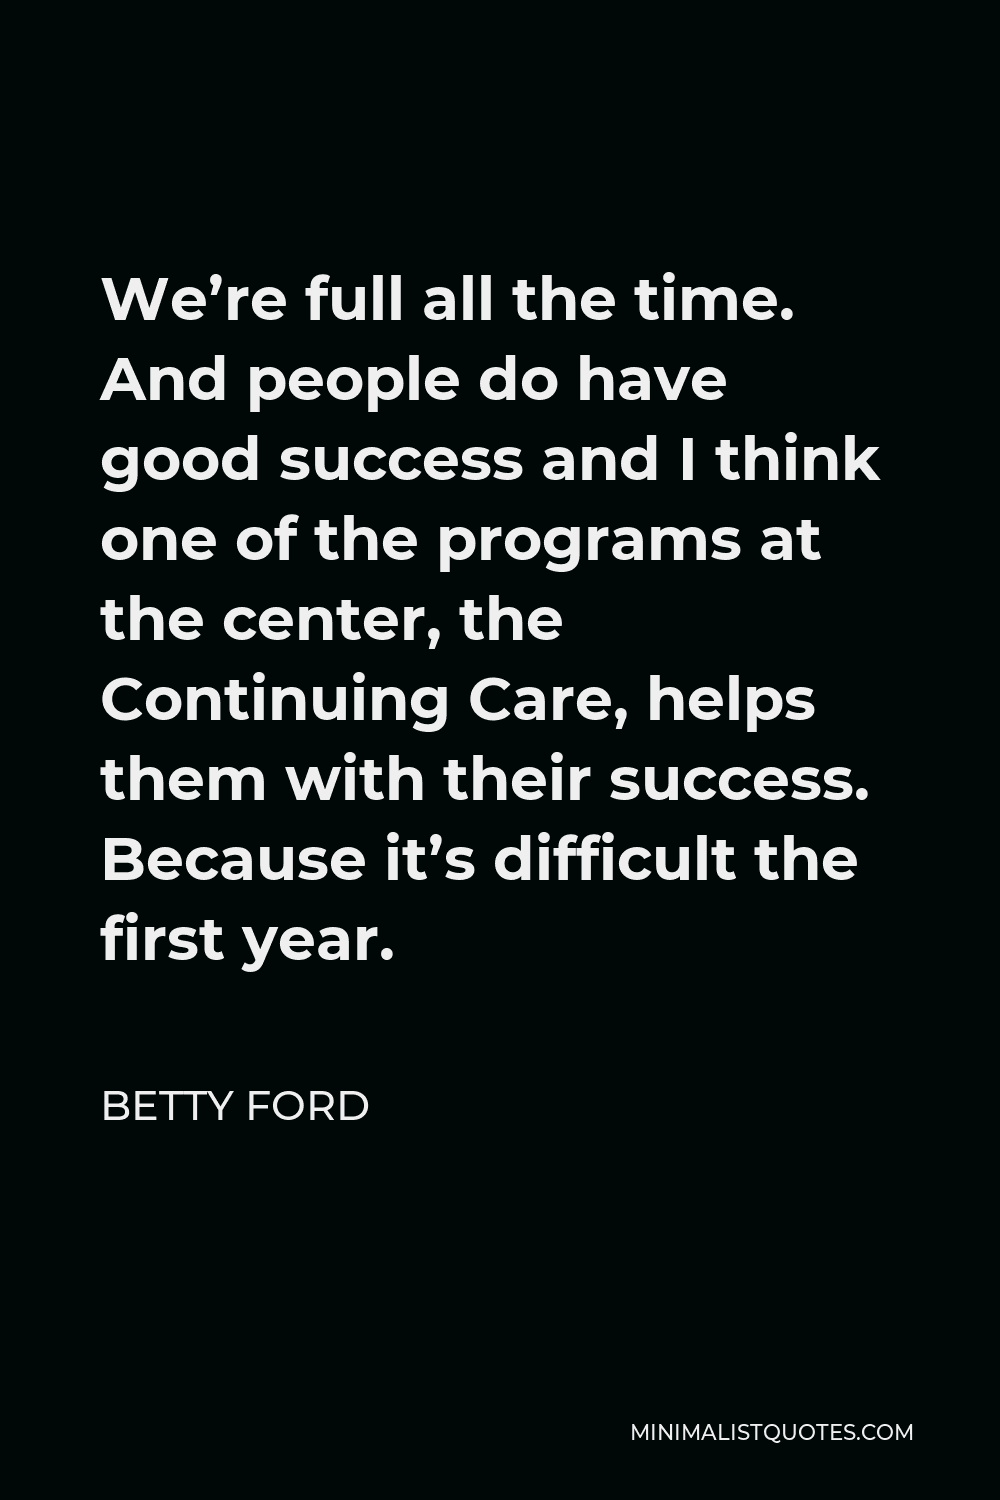 Betty Ford Quote - We’re full all the time. And people do have good success and I think one of the programs at the center, the Continuing Care, helps them with their success. Because it’s difficult the first year.